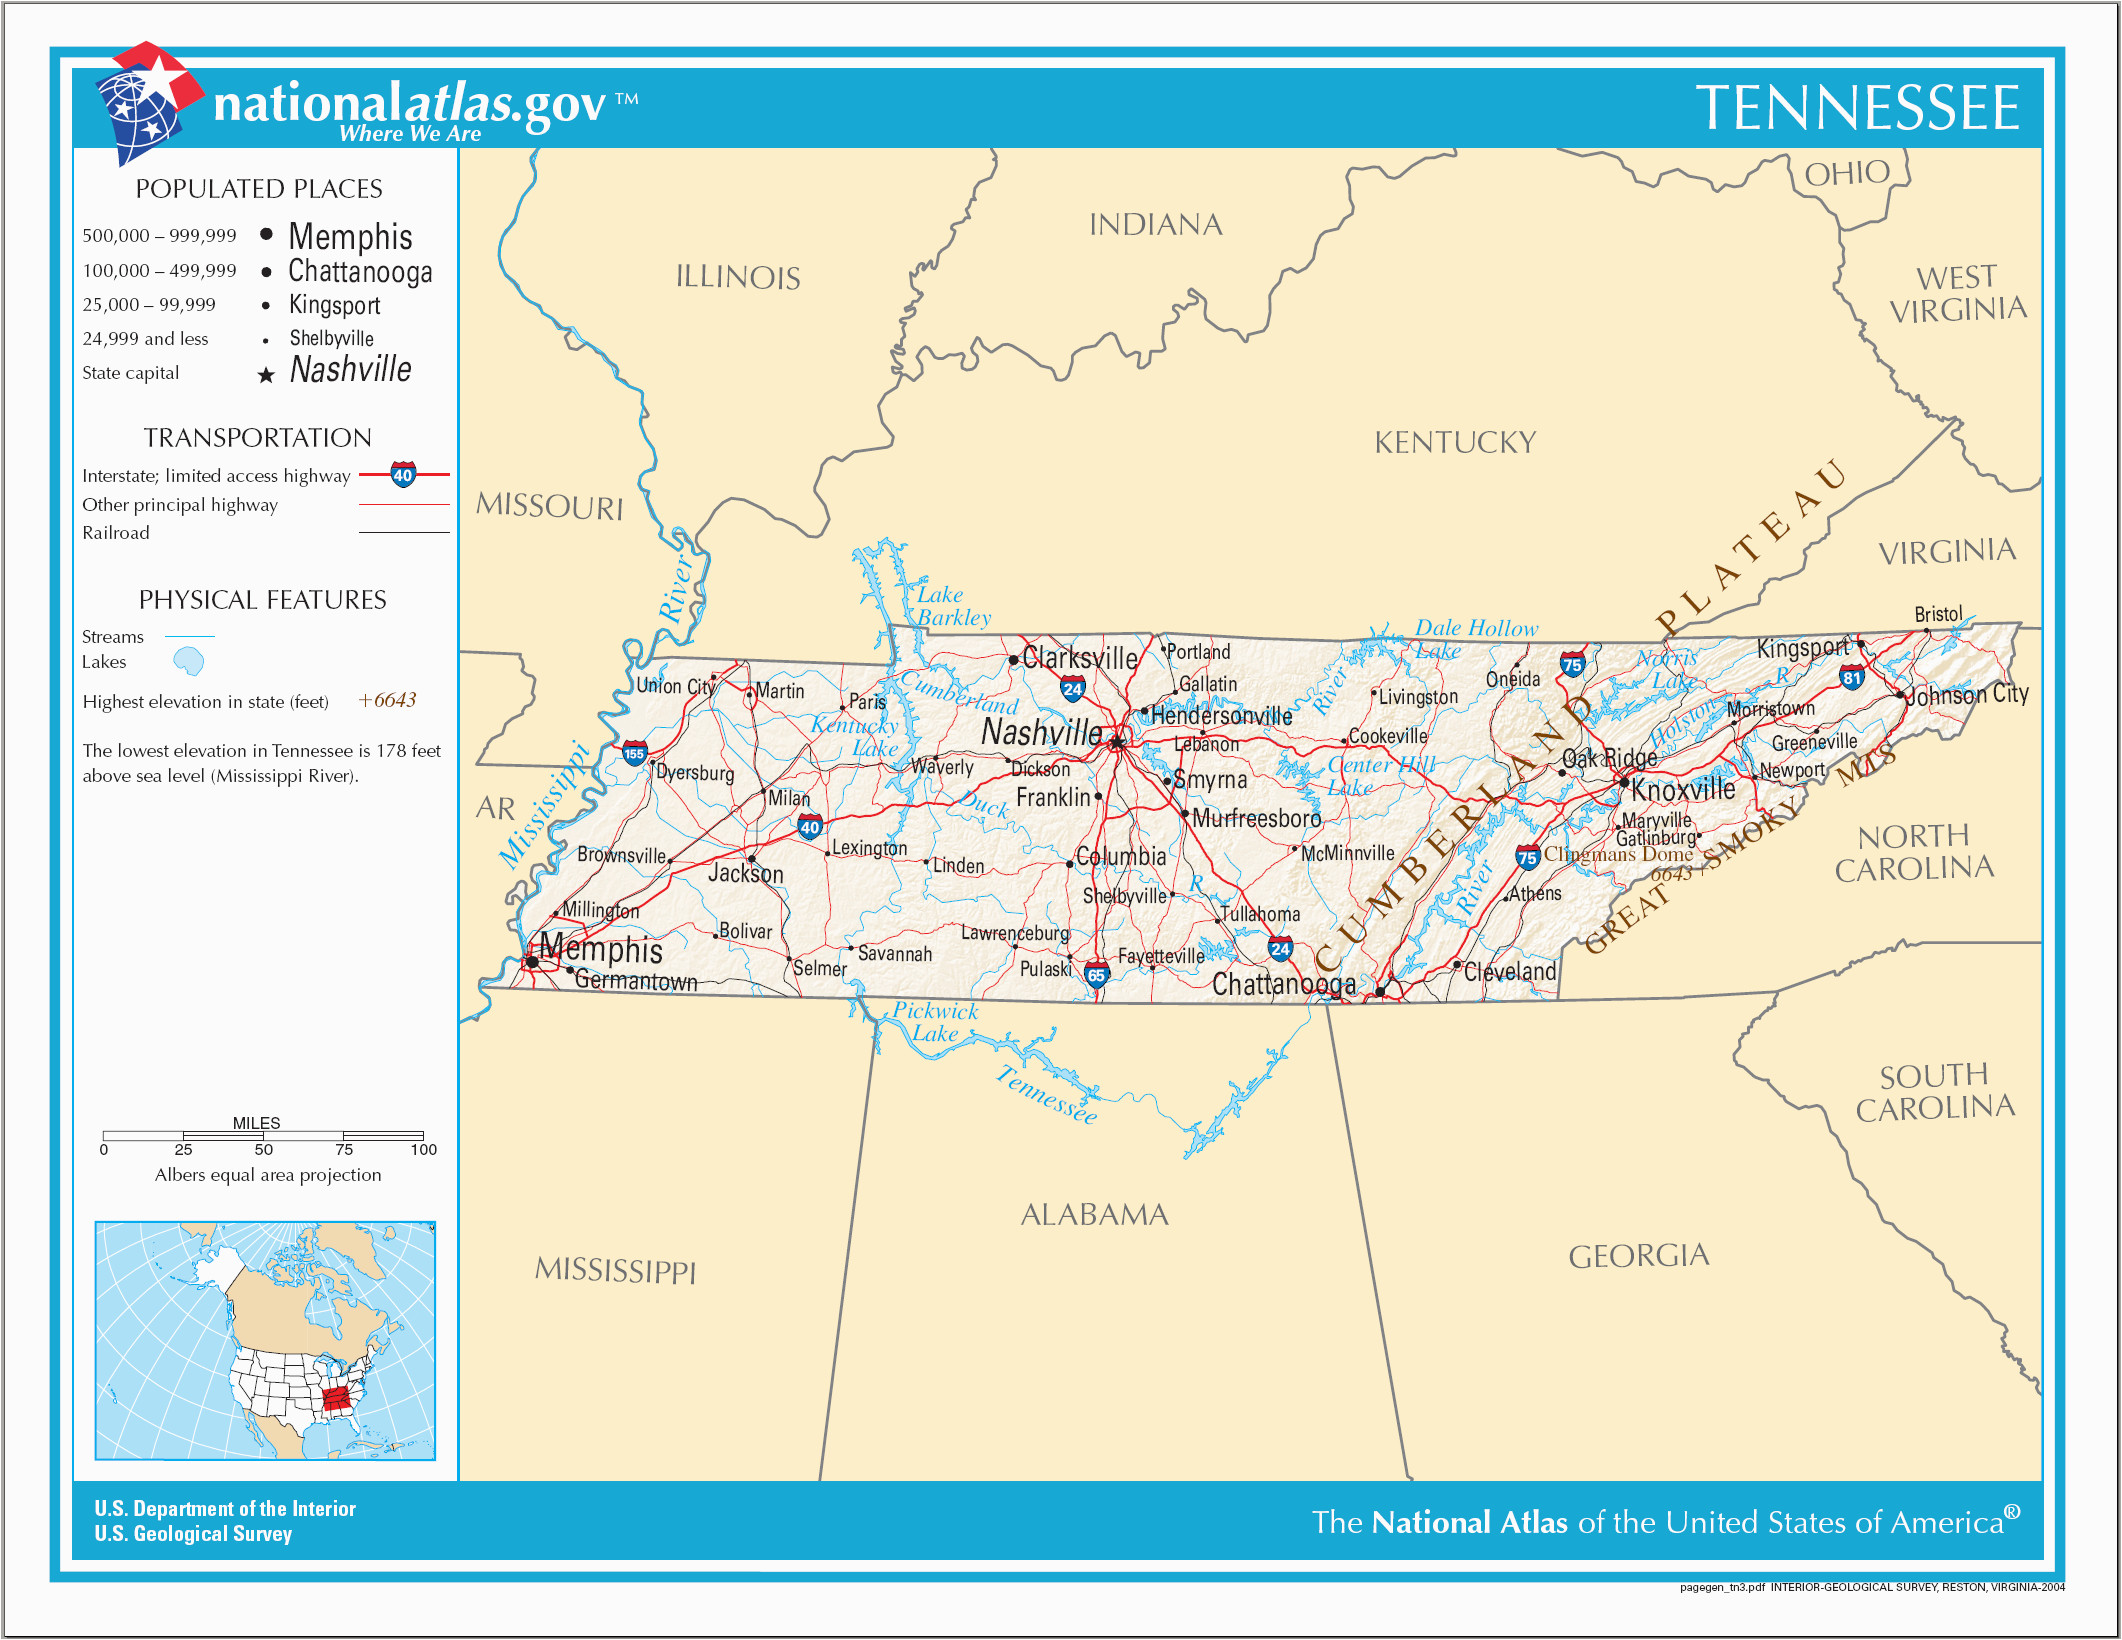 Map Of Gallatin Tennessee Datei Map Of Tennessee Na Png Wikipedia